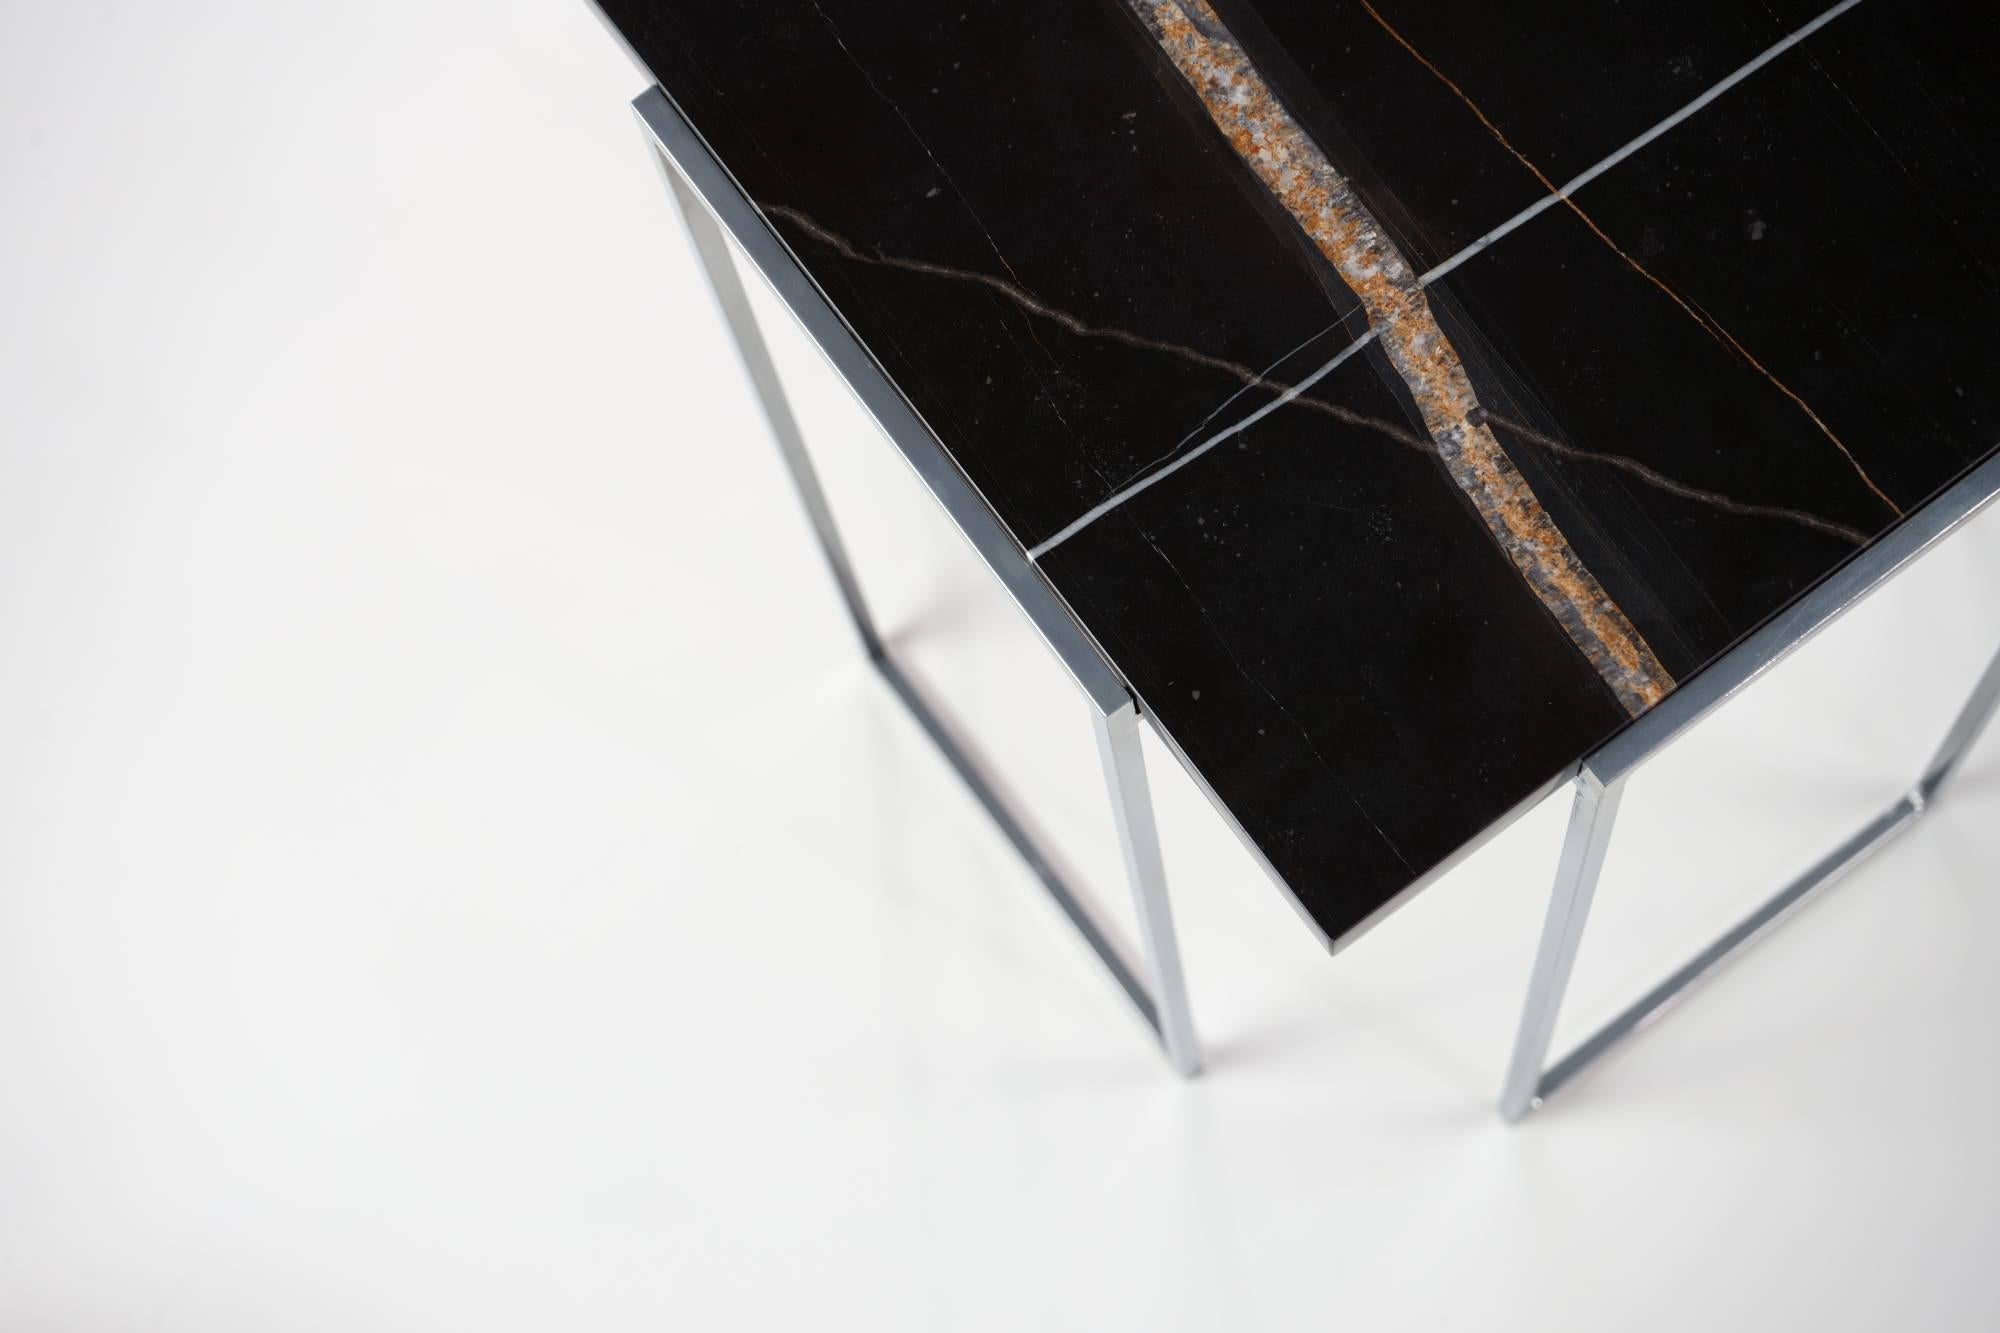 Kaus Cromo, Sahara Noir Side Table By DFdesignlab Handmade in Italy In New Condition For Sale In Campobasso, CB